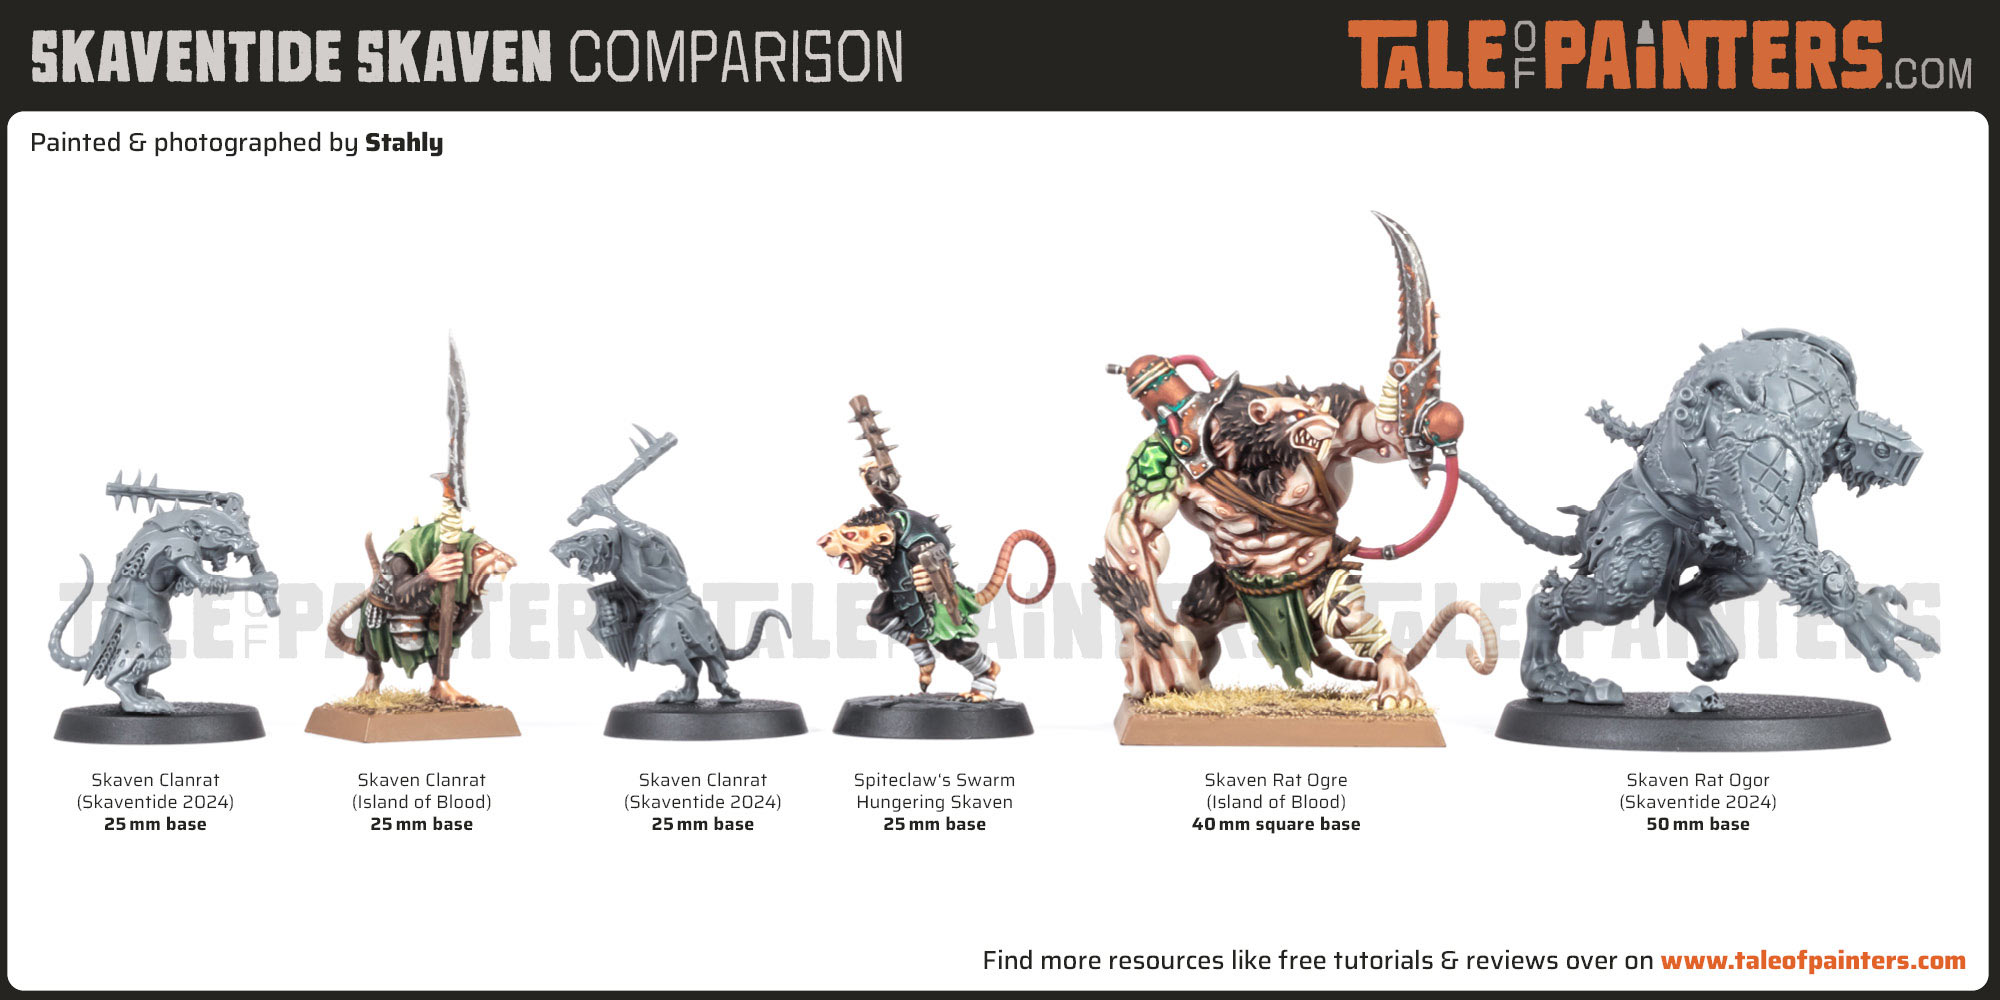 Skaventide Skaven scale comparison with old and new Clanrats and Rat Ogres